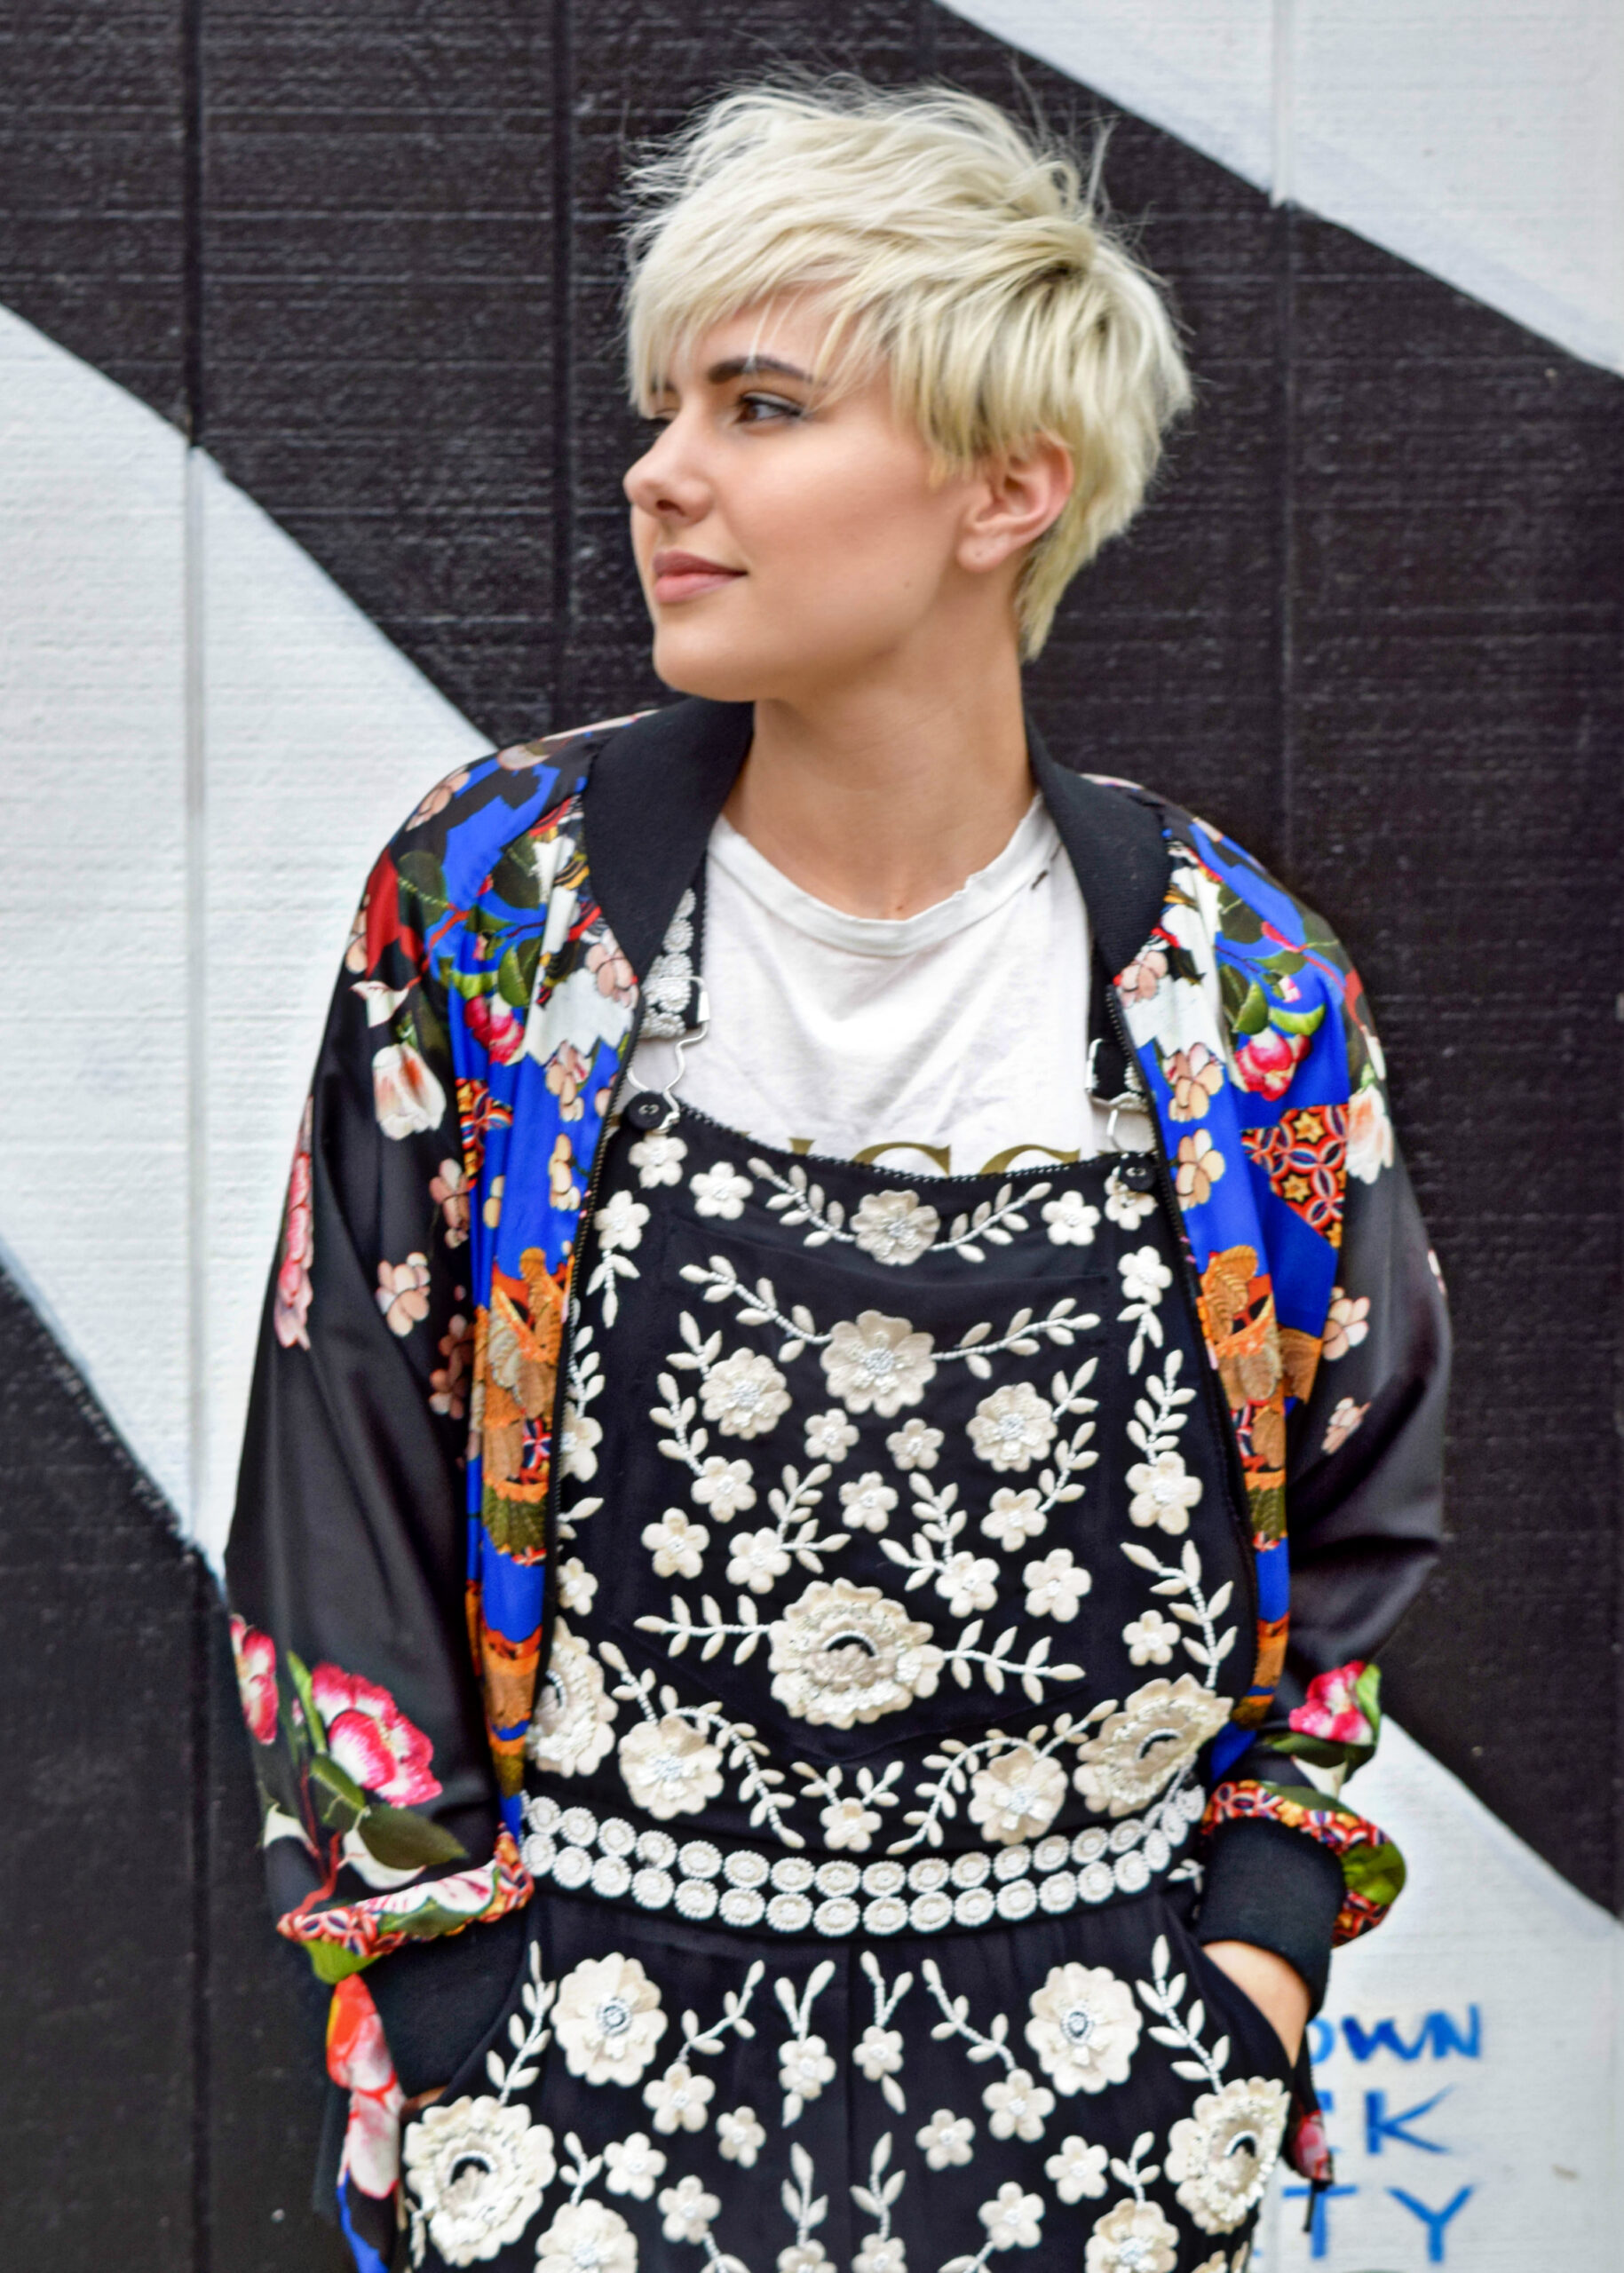 Print Mixing and Overalls 2- 3 New Ways to Wear Your Bomber Jacket for 2017 - BloggerNotBillionaire.com